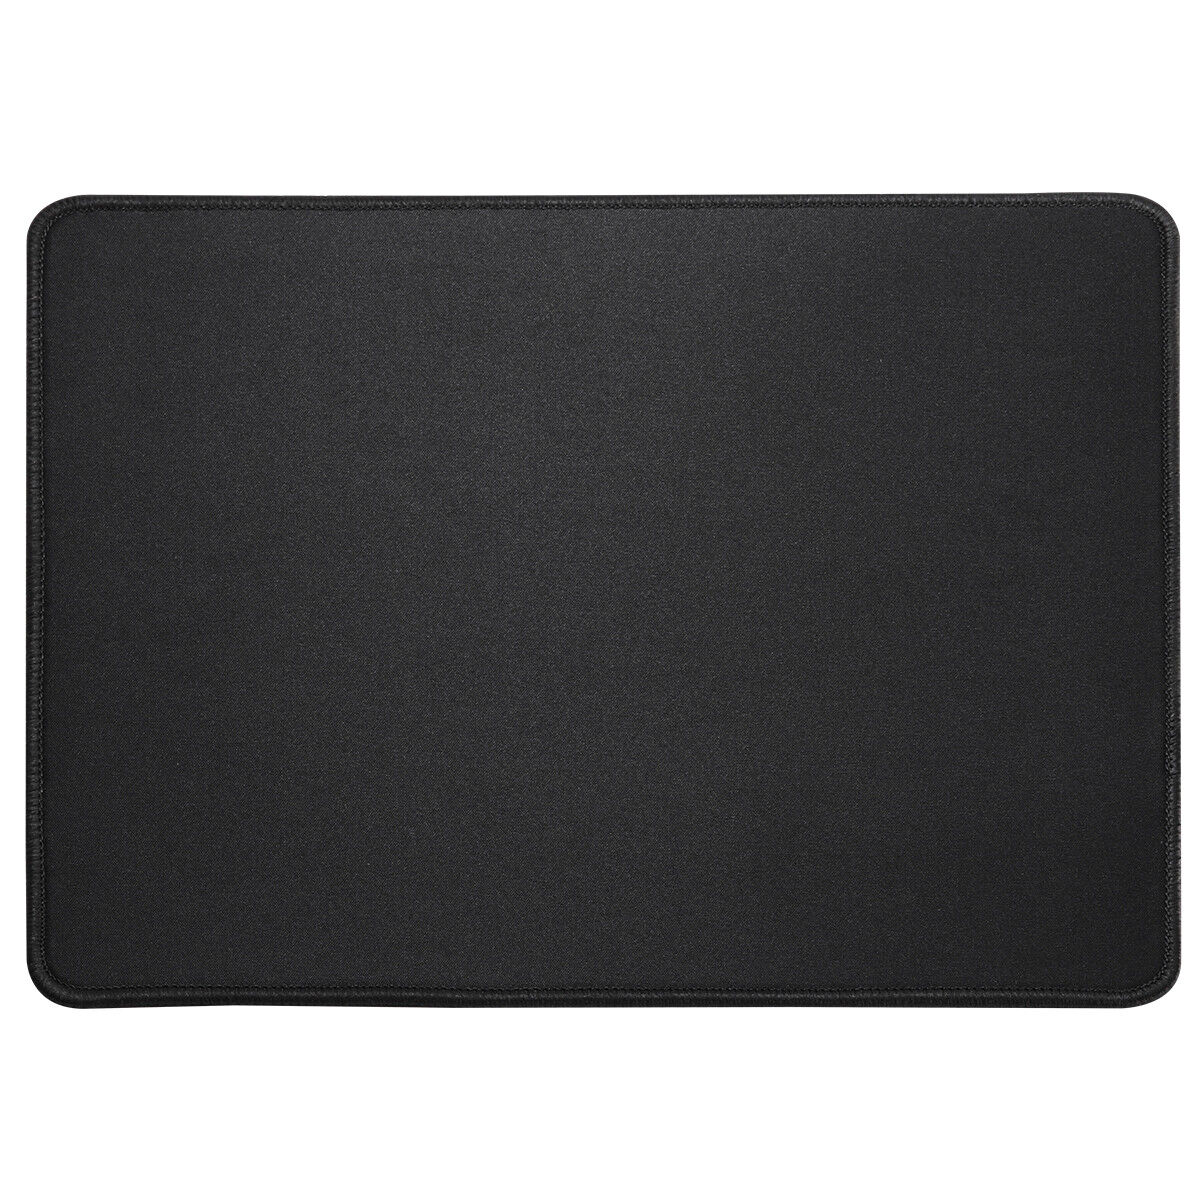 Luxury Office Large Laptop Soft Cushion Keyboard Mouse Pad Computer Desk Mat US